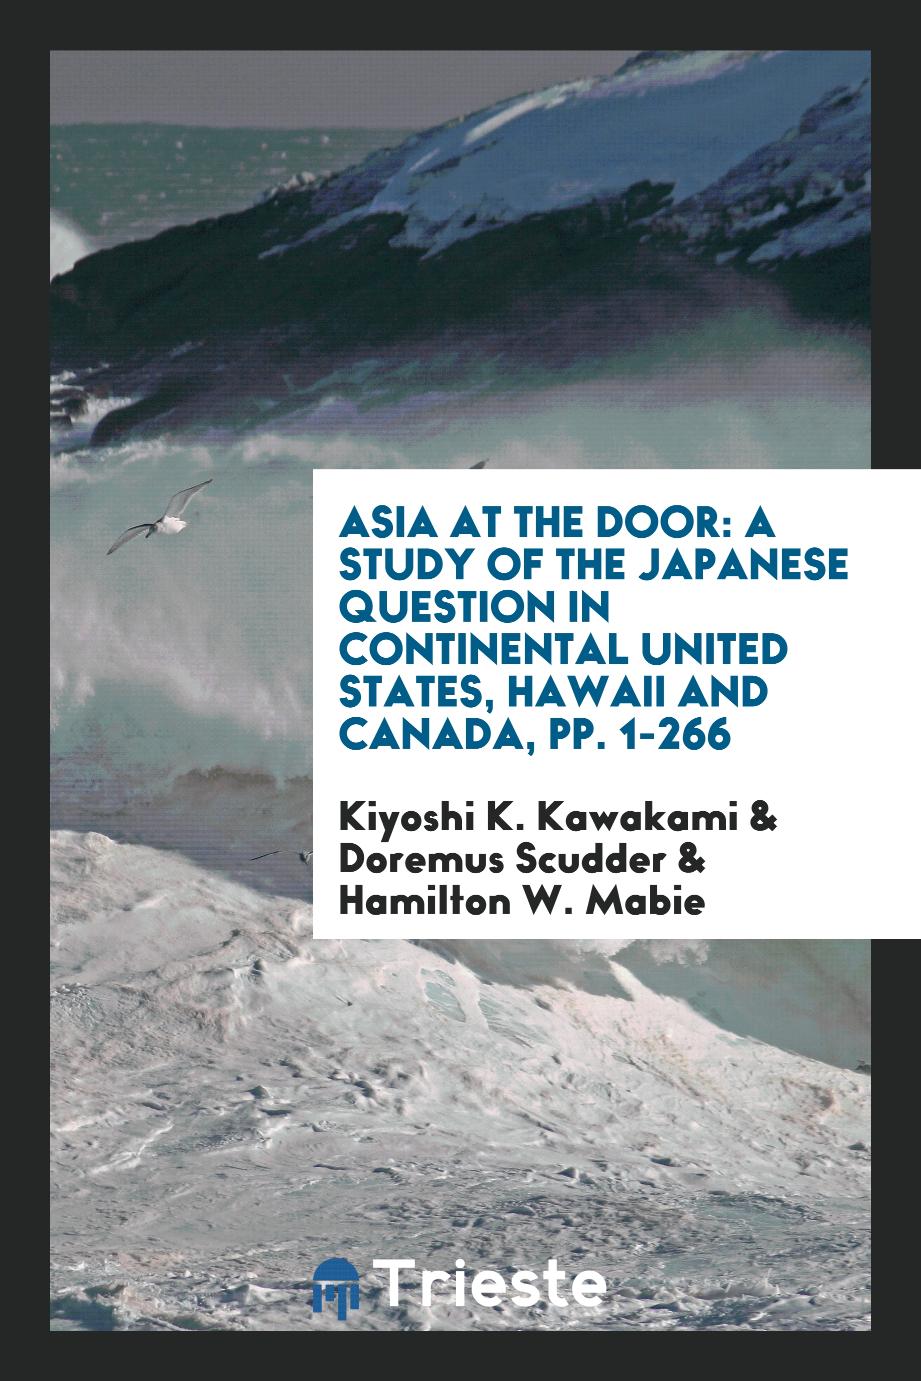 Asia at the Door: A Study of the Japanese Question in Continental United States, Hawaii and Canada, pp. 1-266